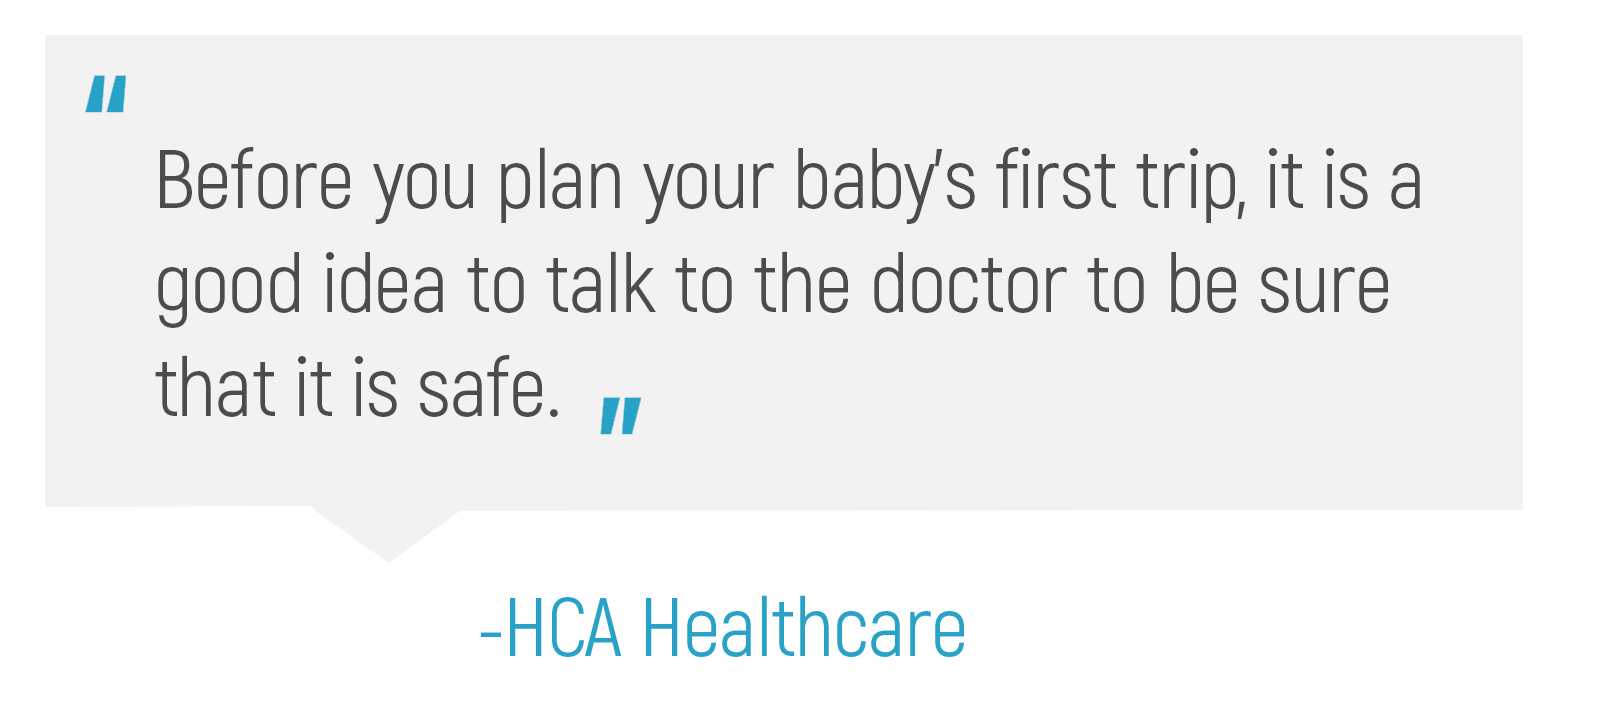 "Before you plan your baby's first trip, it is a good idea to talk to the doctor to be sure that it is safe."